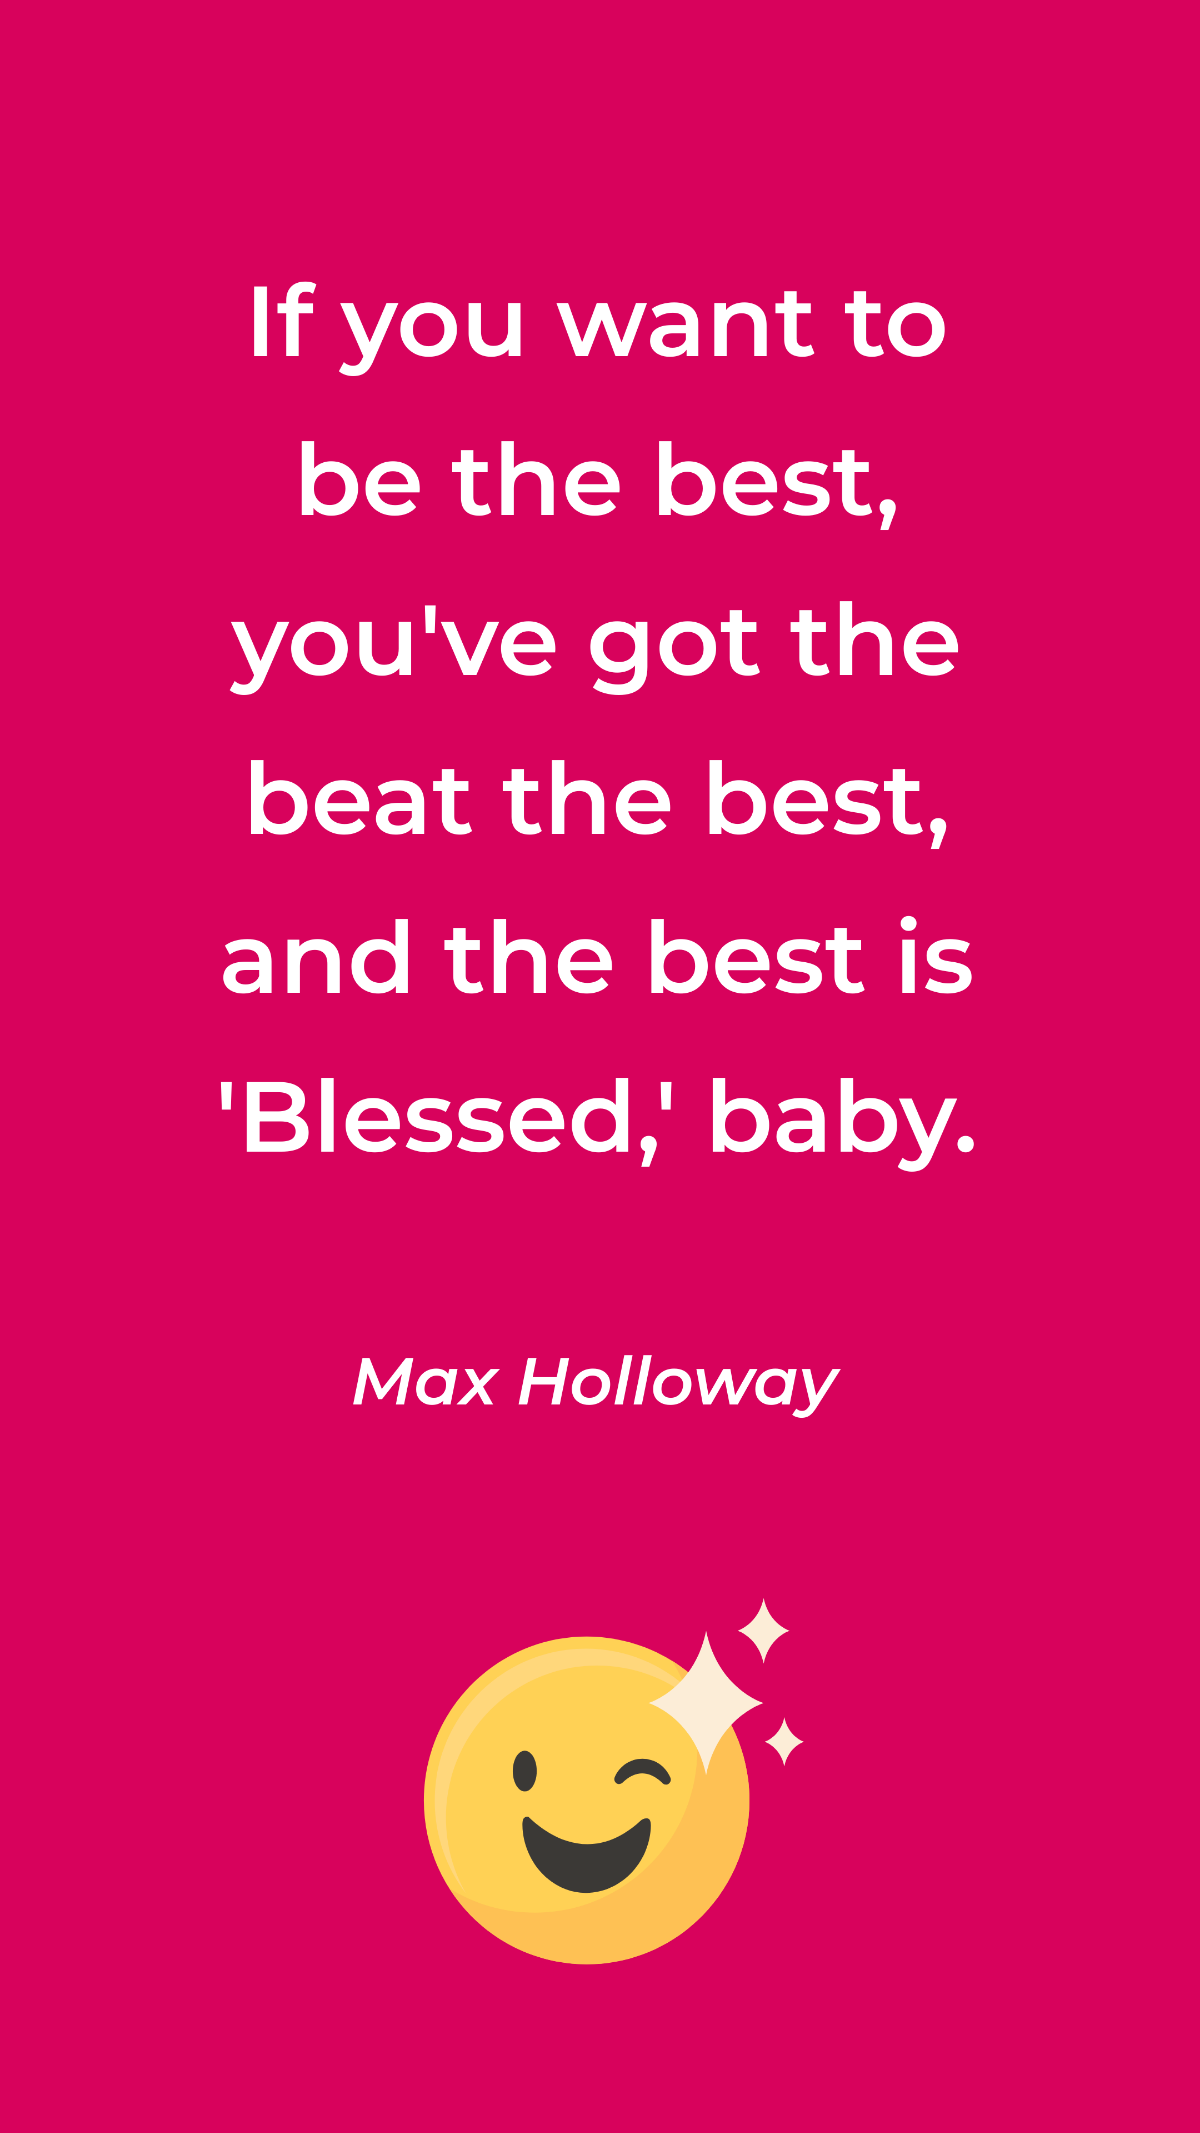 Max Holloway - If you want to be the best, you've got the beat the best, and the best is 'Blessed,' baby. Template